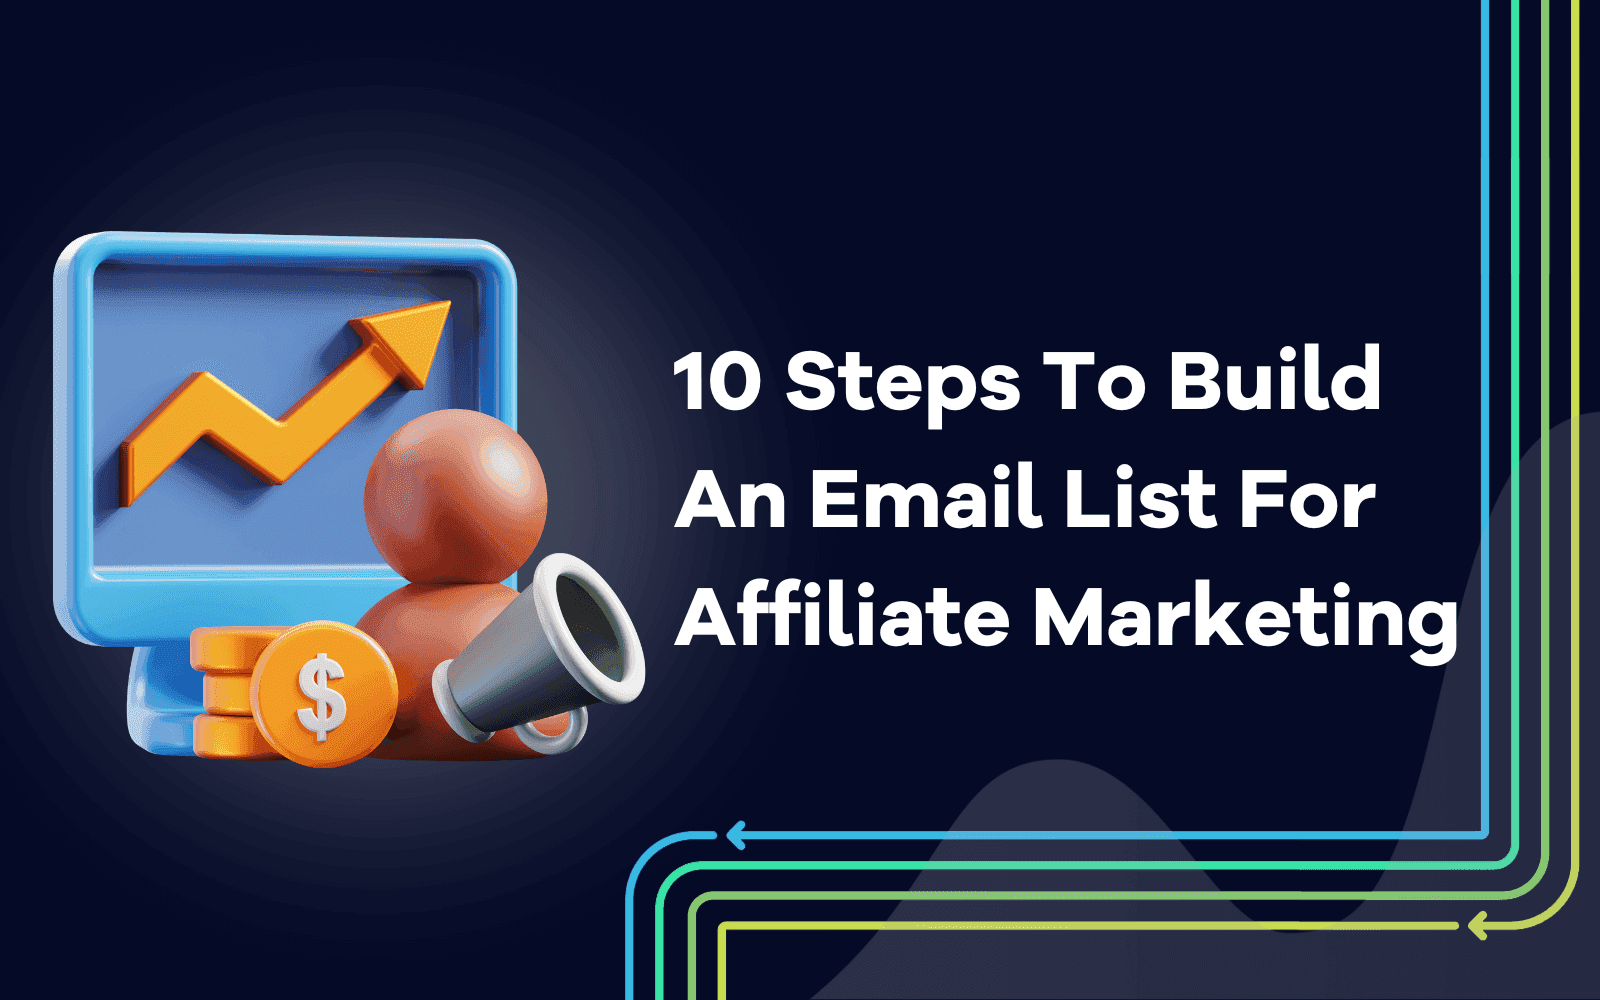 Steps To Build An Email List For Affiliate Marketing